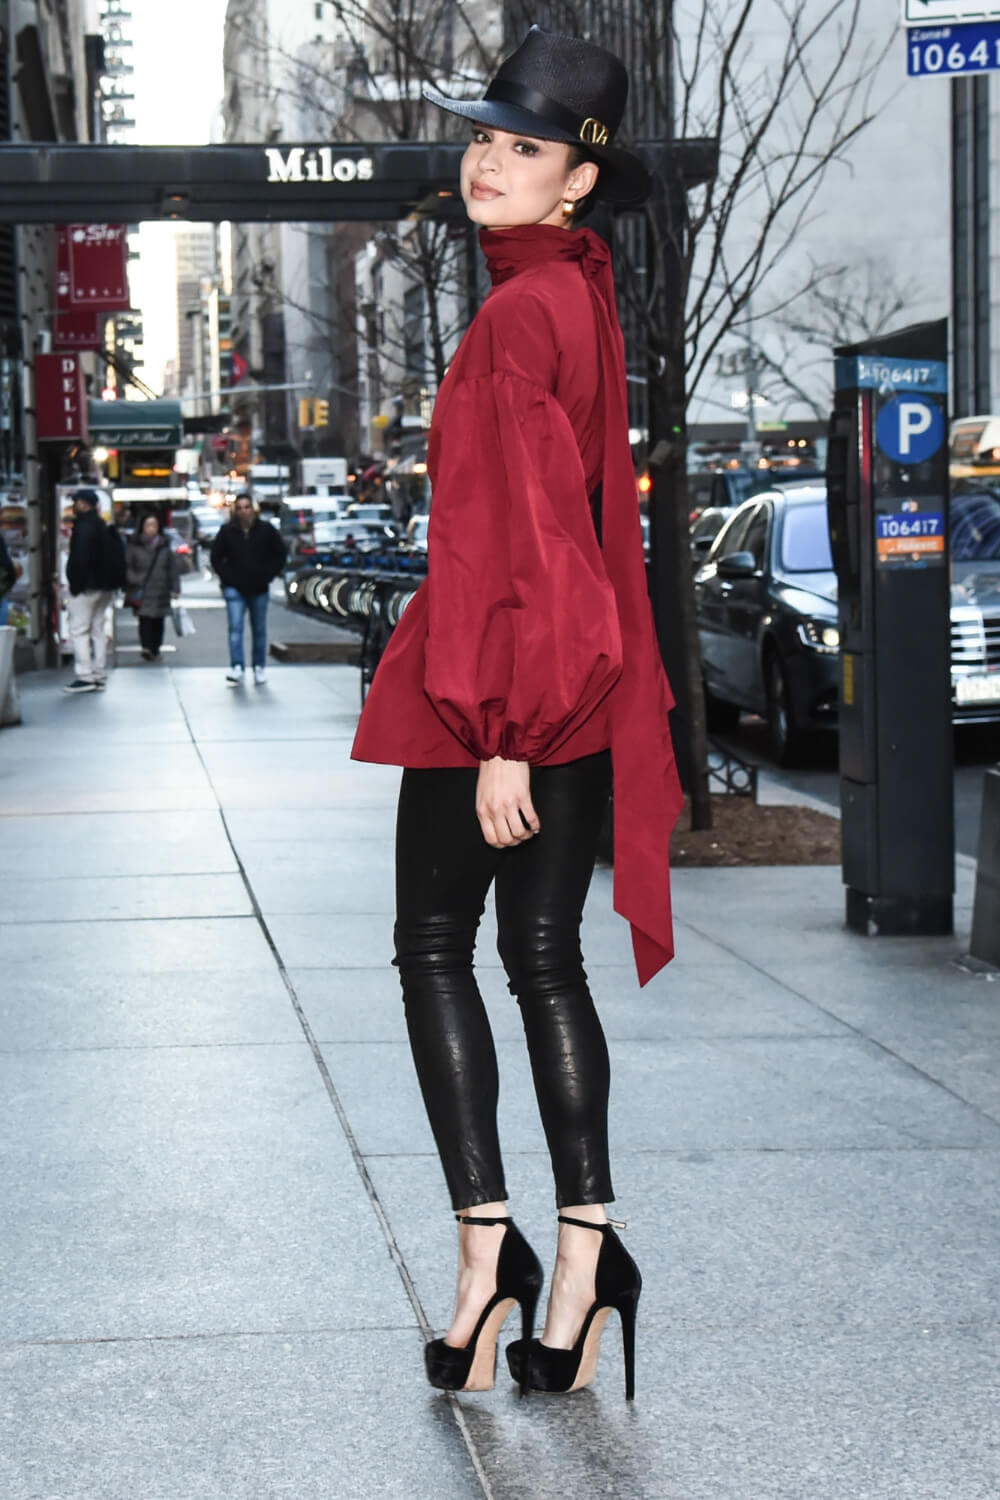 Sofia Carson is seen on the streets of Manhattan